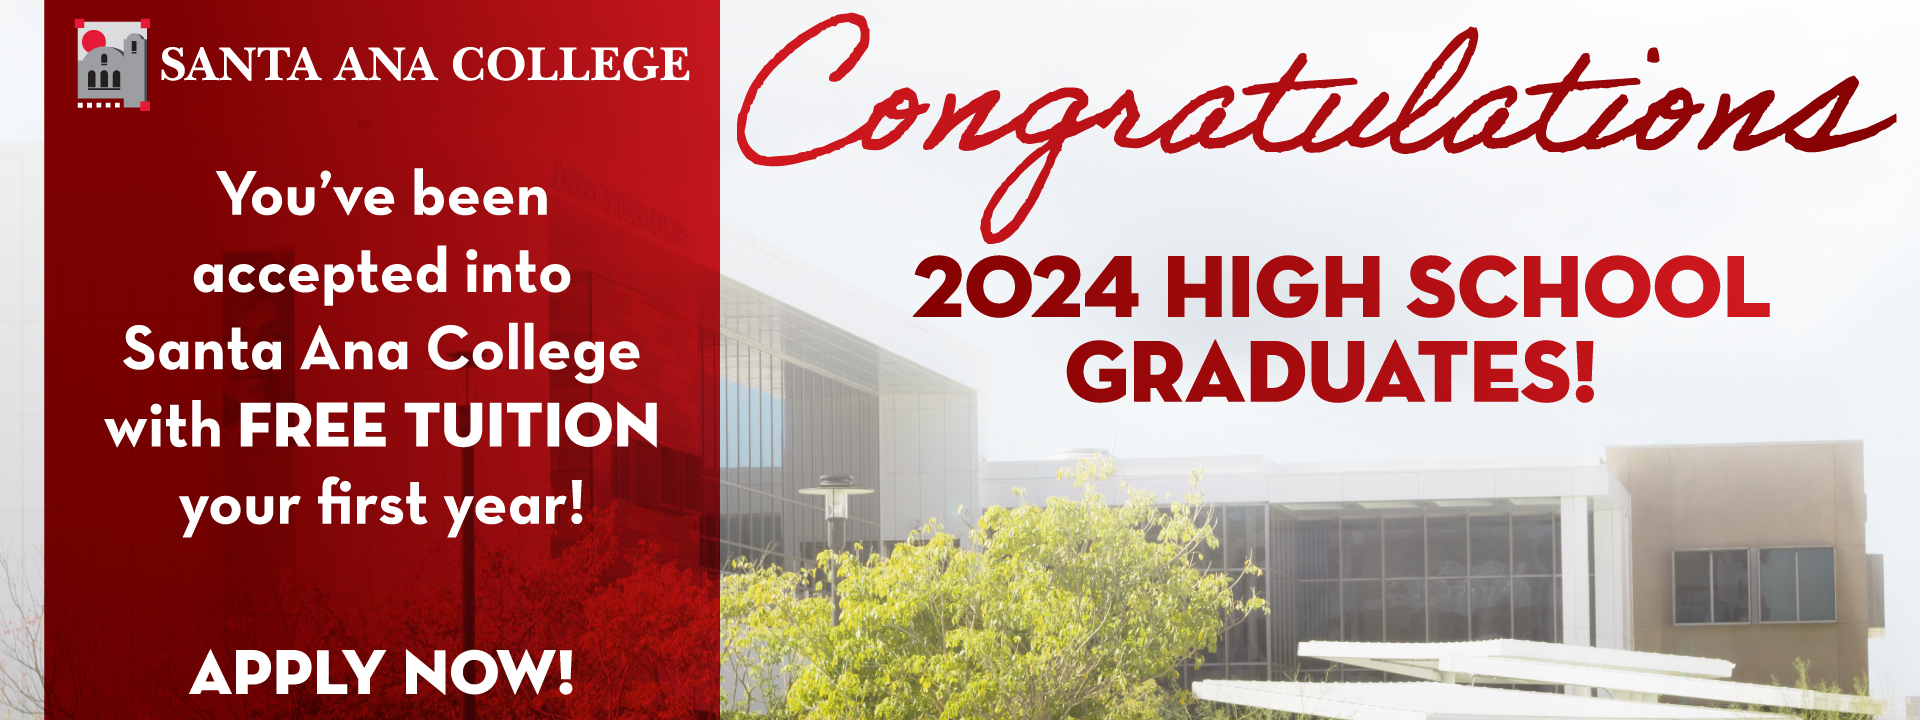 Congrats 2024 HS Graduates. You've been accepted into Santa Ana College with Free Tuition your First Year! 